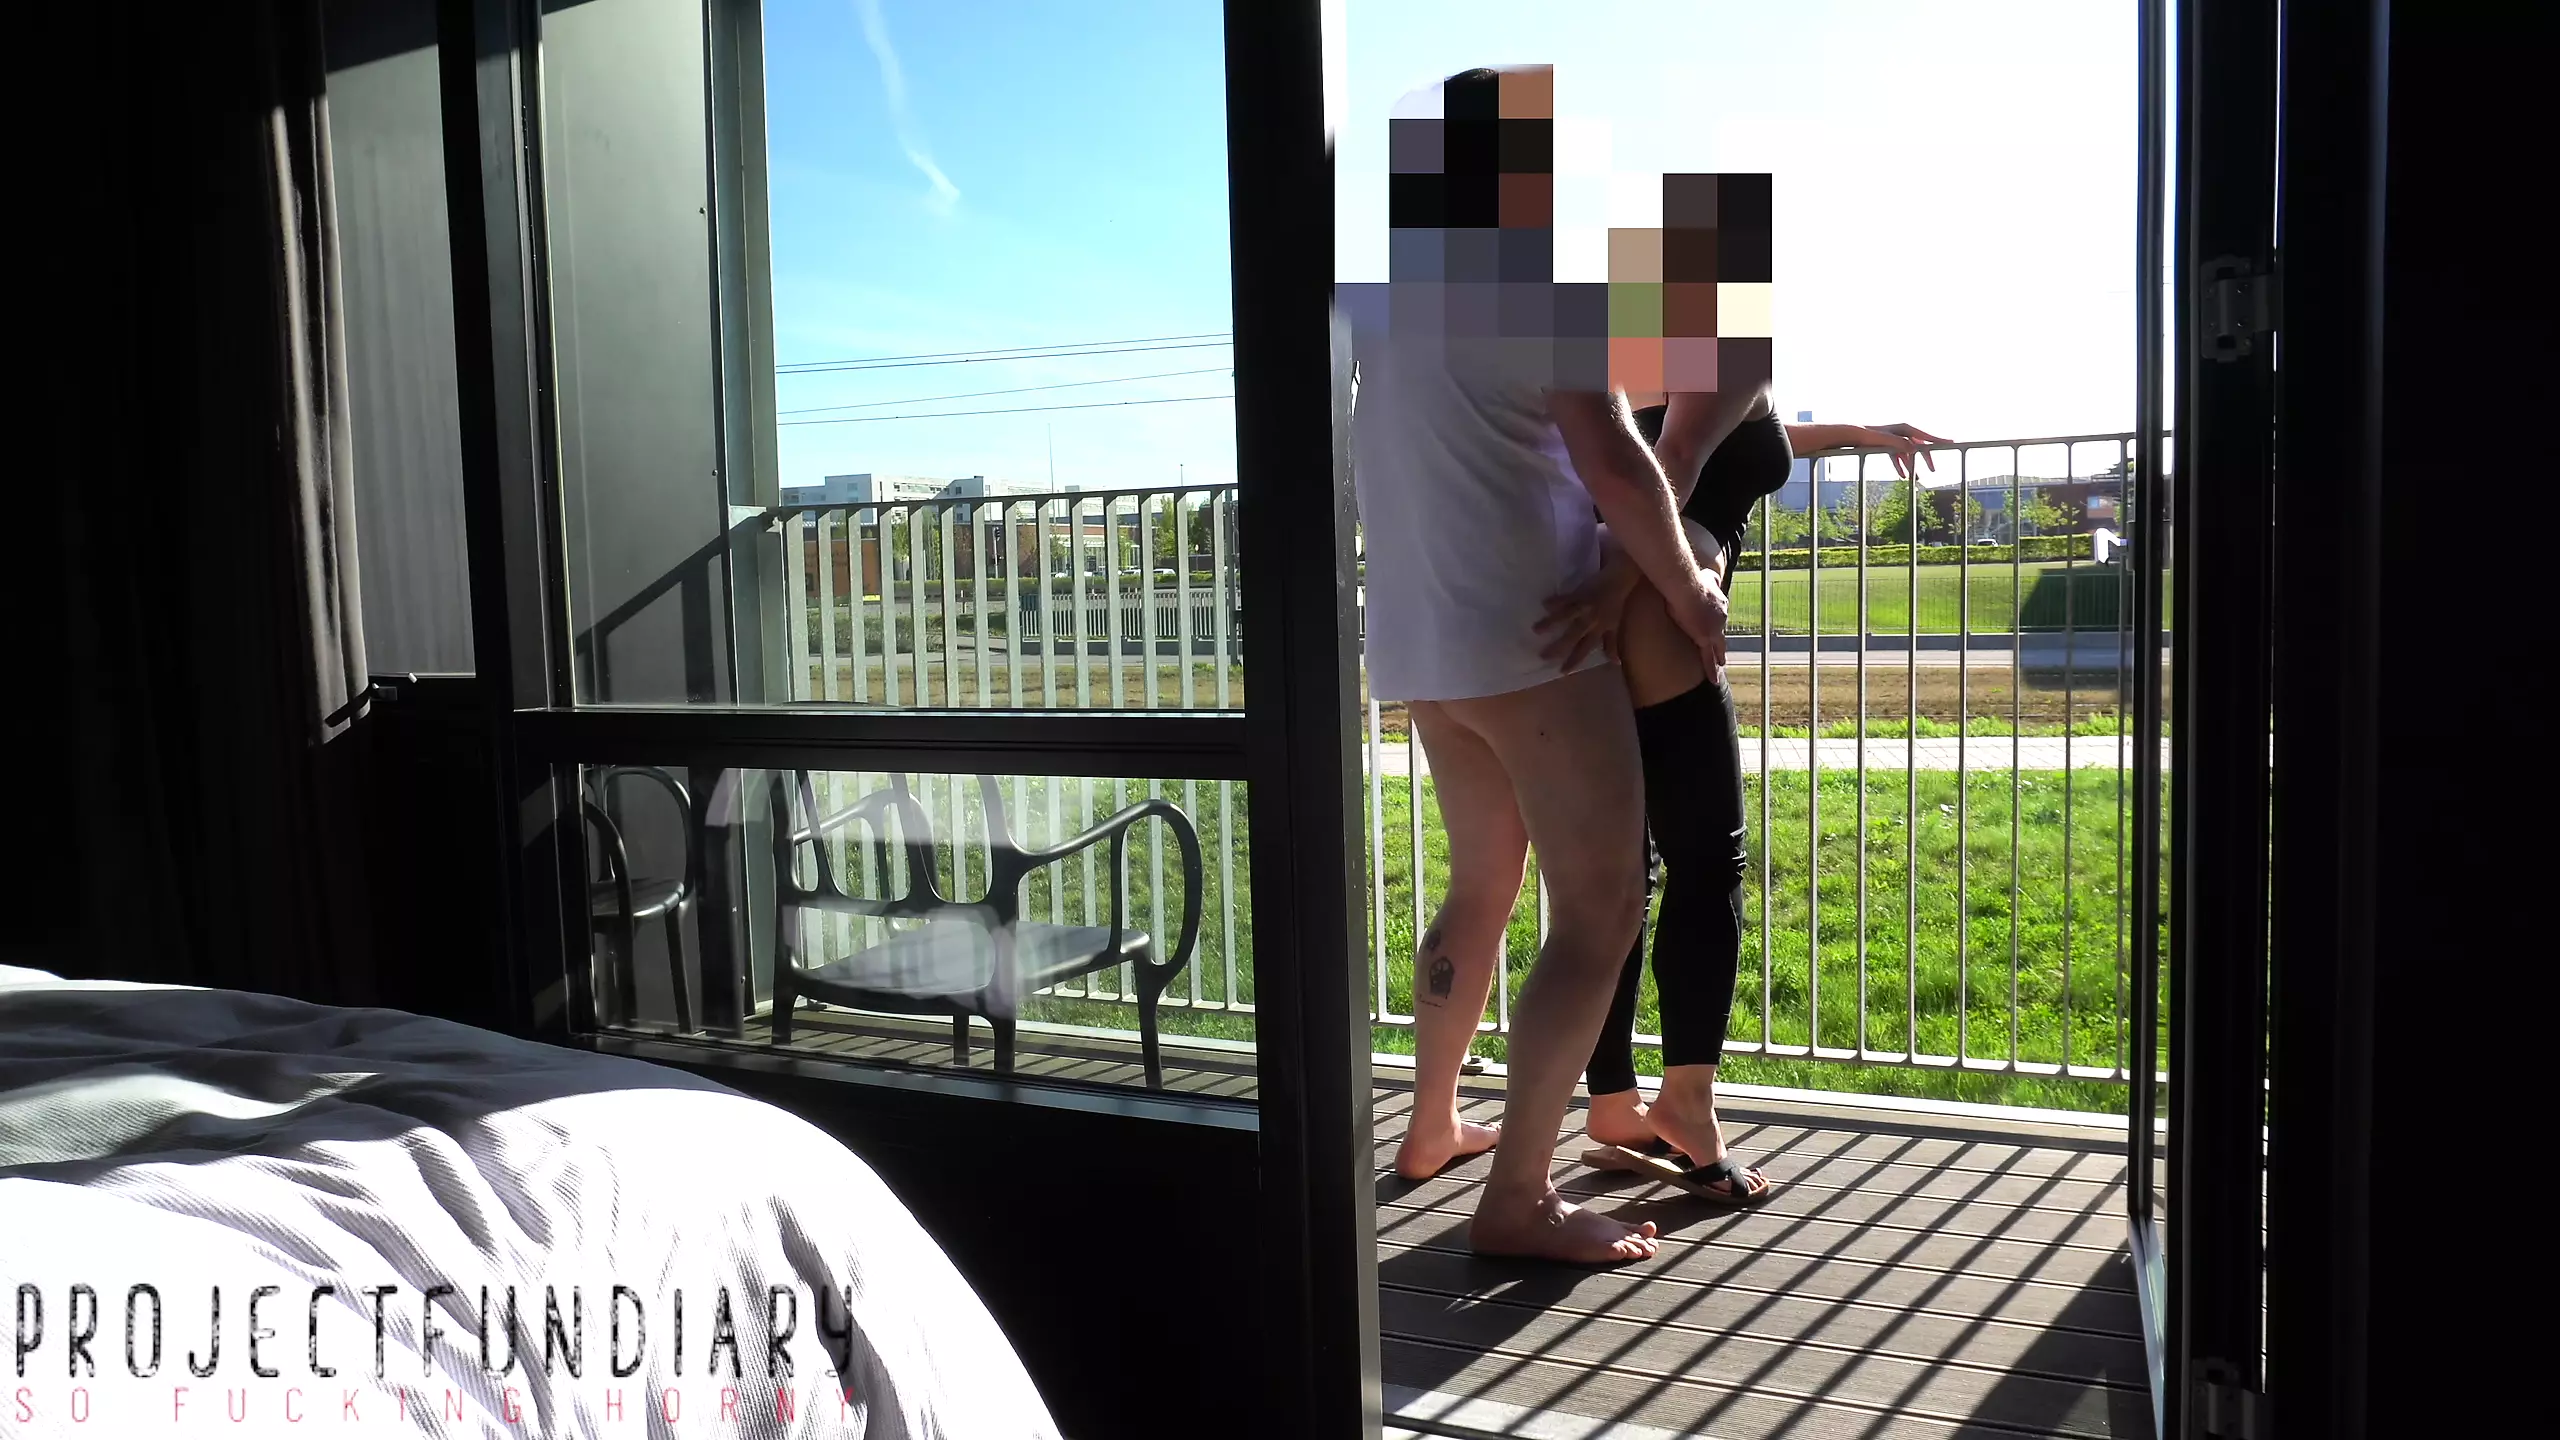 risky public balcony sex with people watching picture